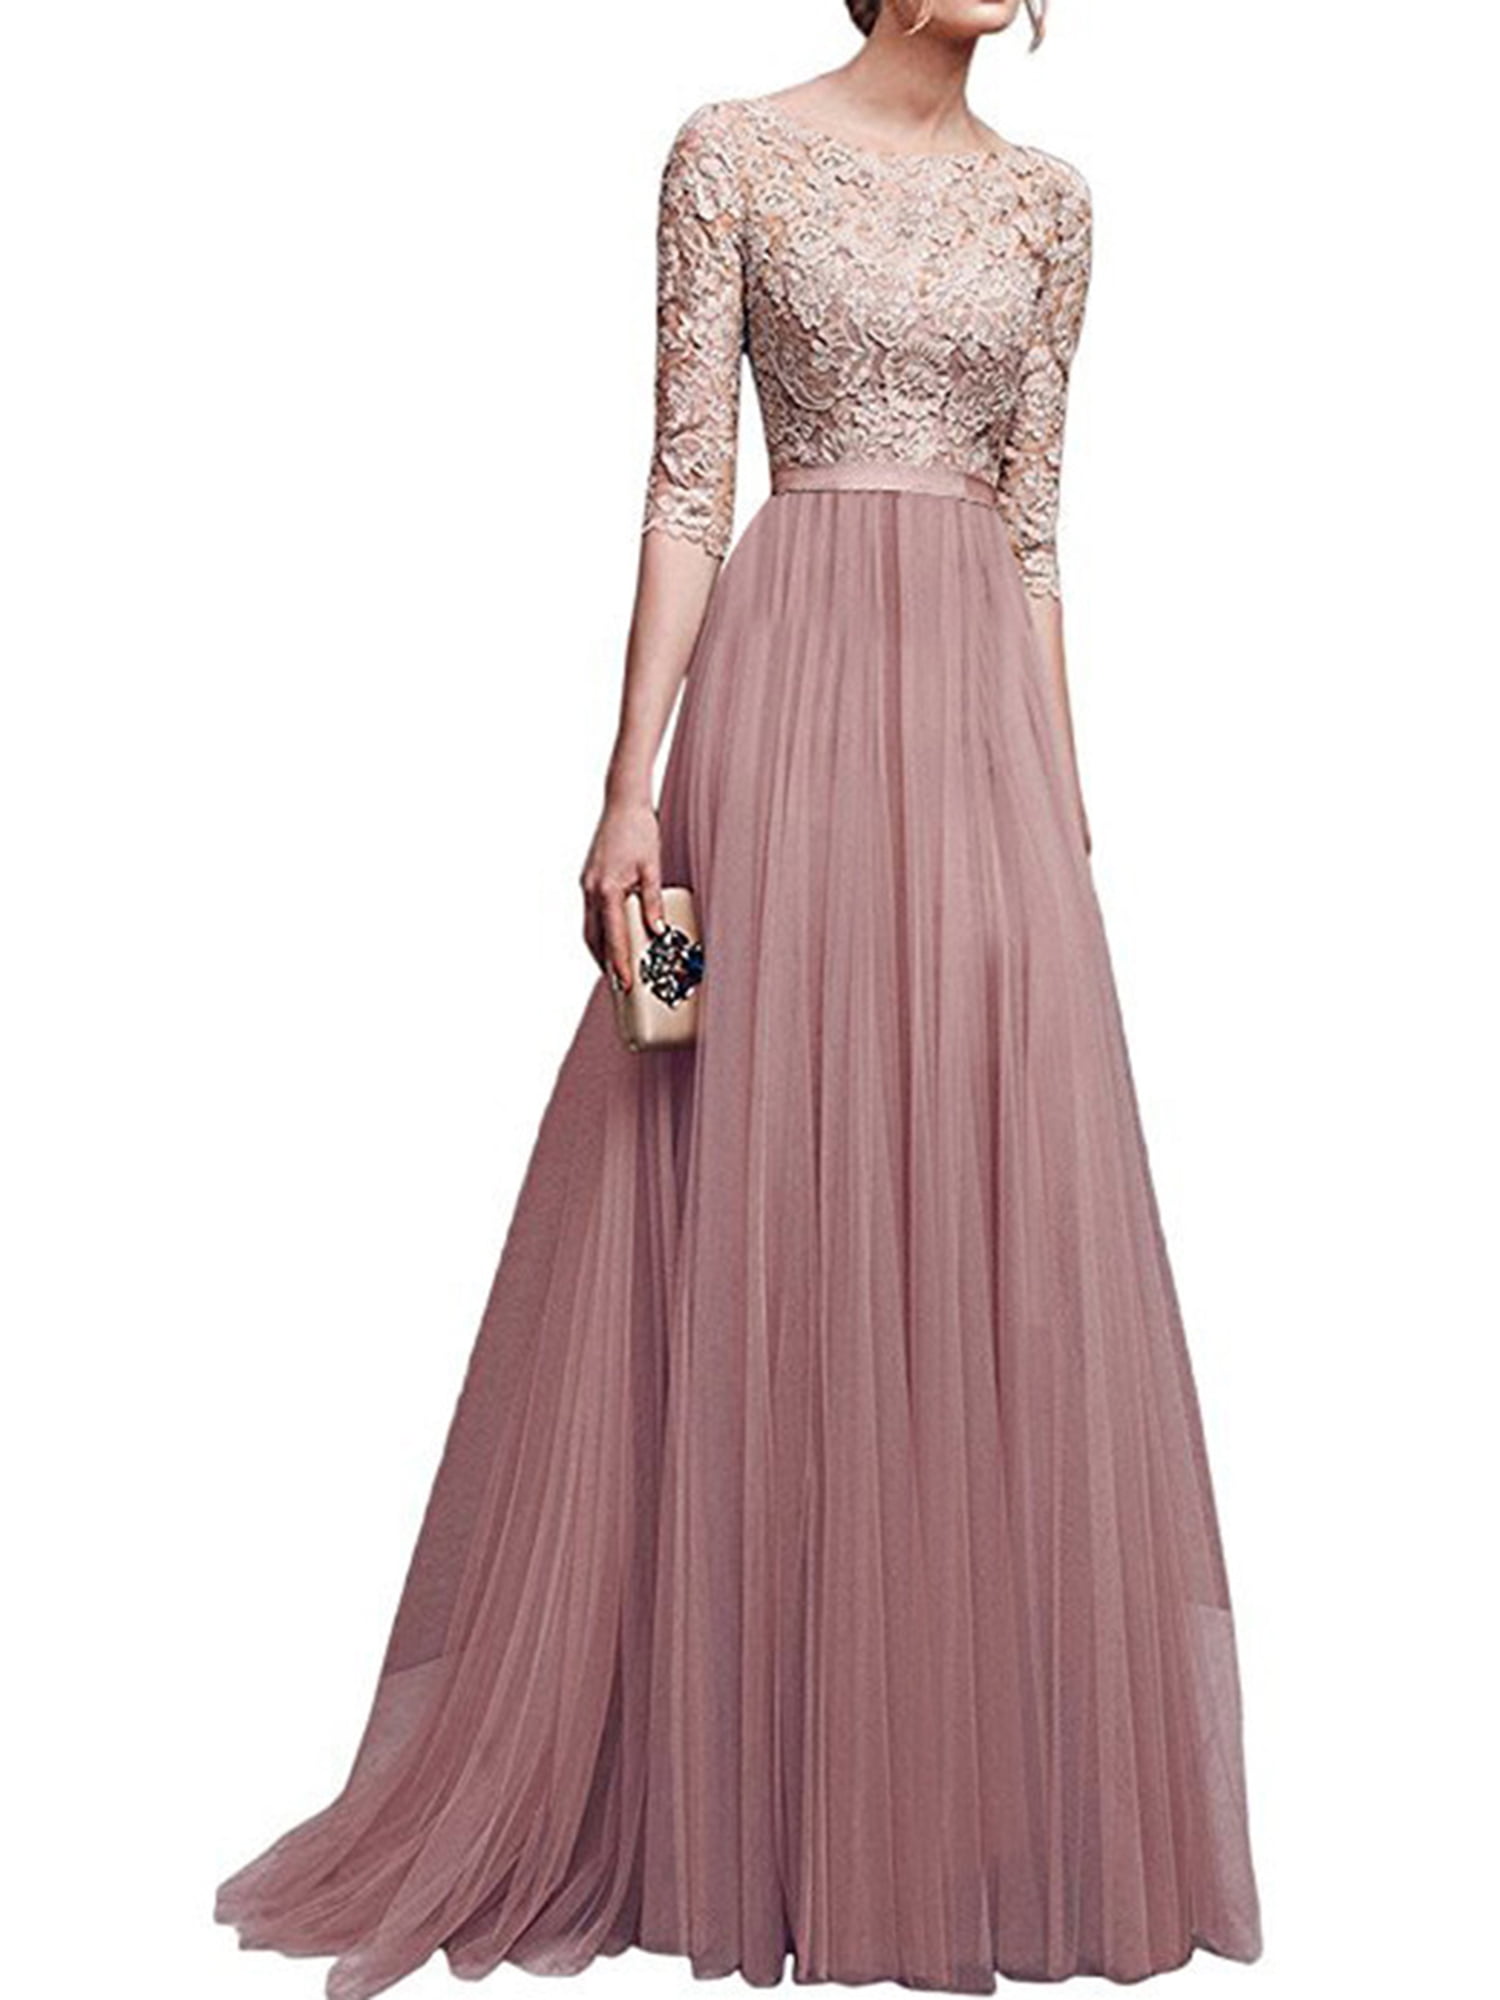 Dunland Women Formal Wedding Bridesmaid Long Evening Party Ball Prom Gown Cocktail Dress 